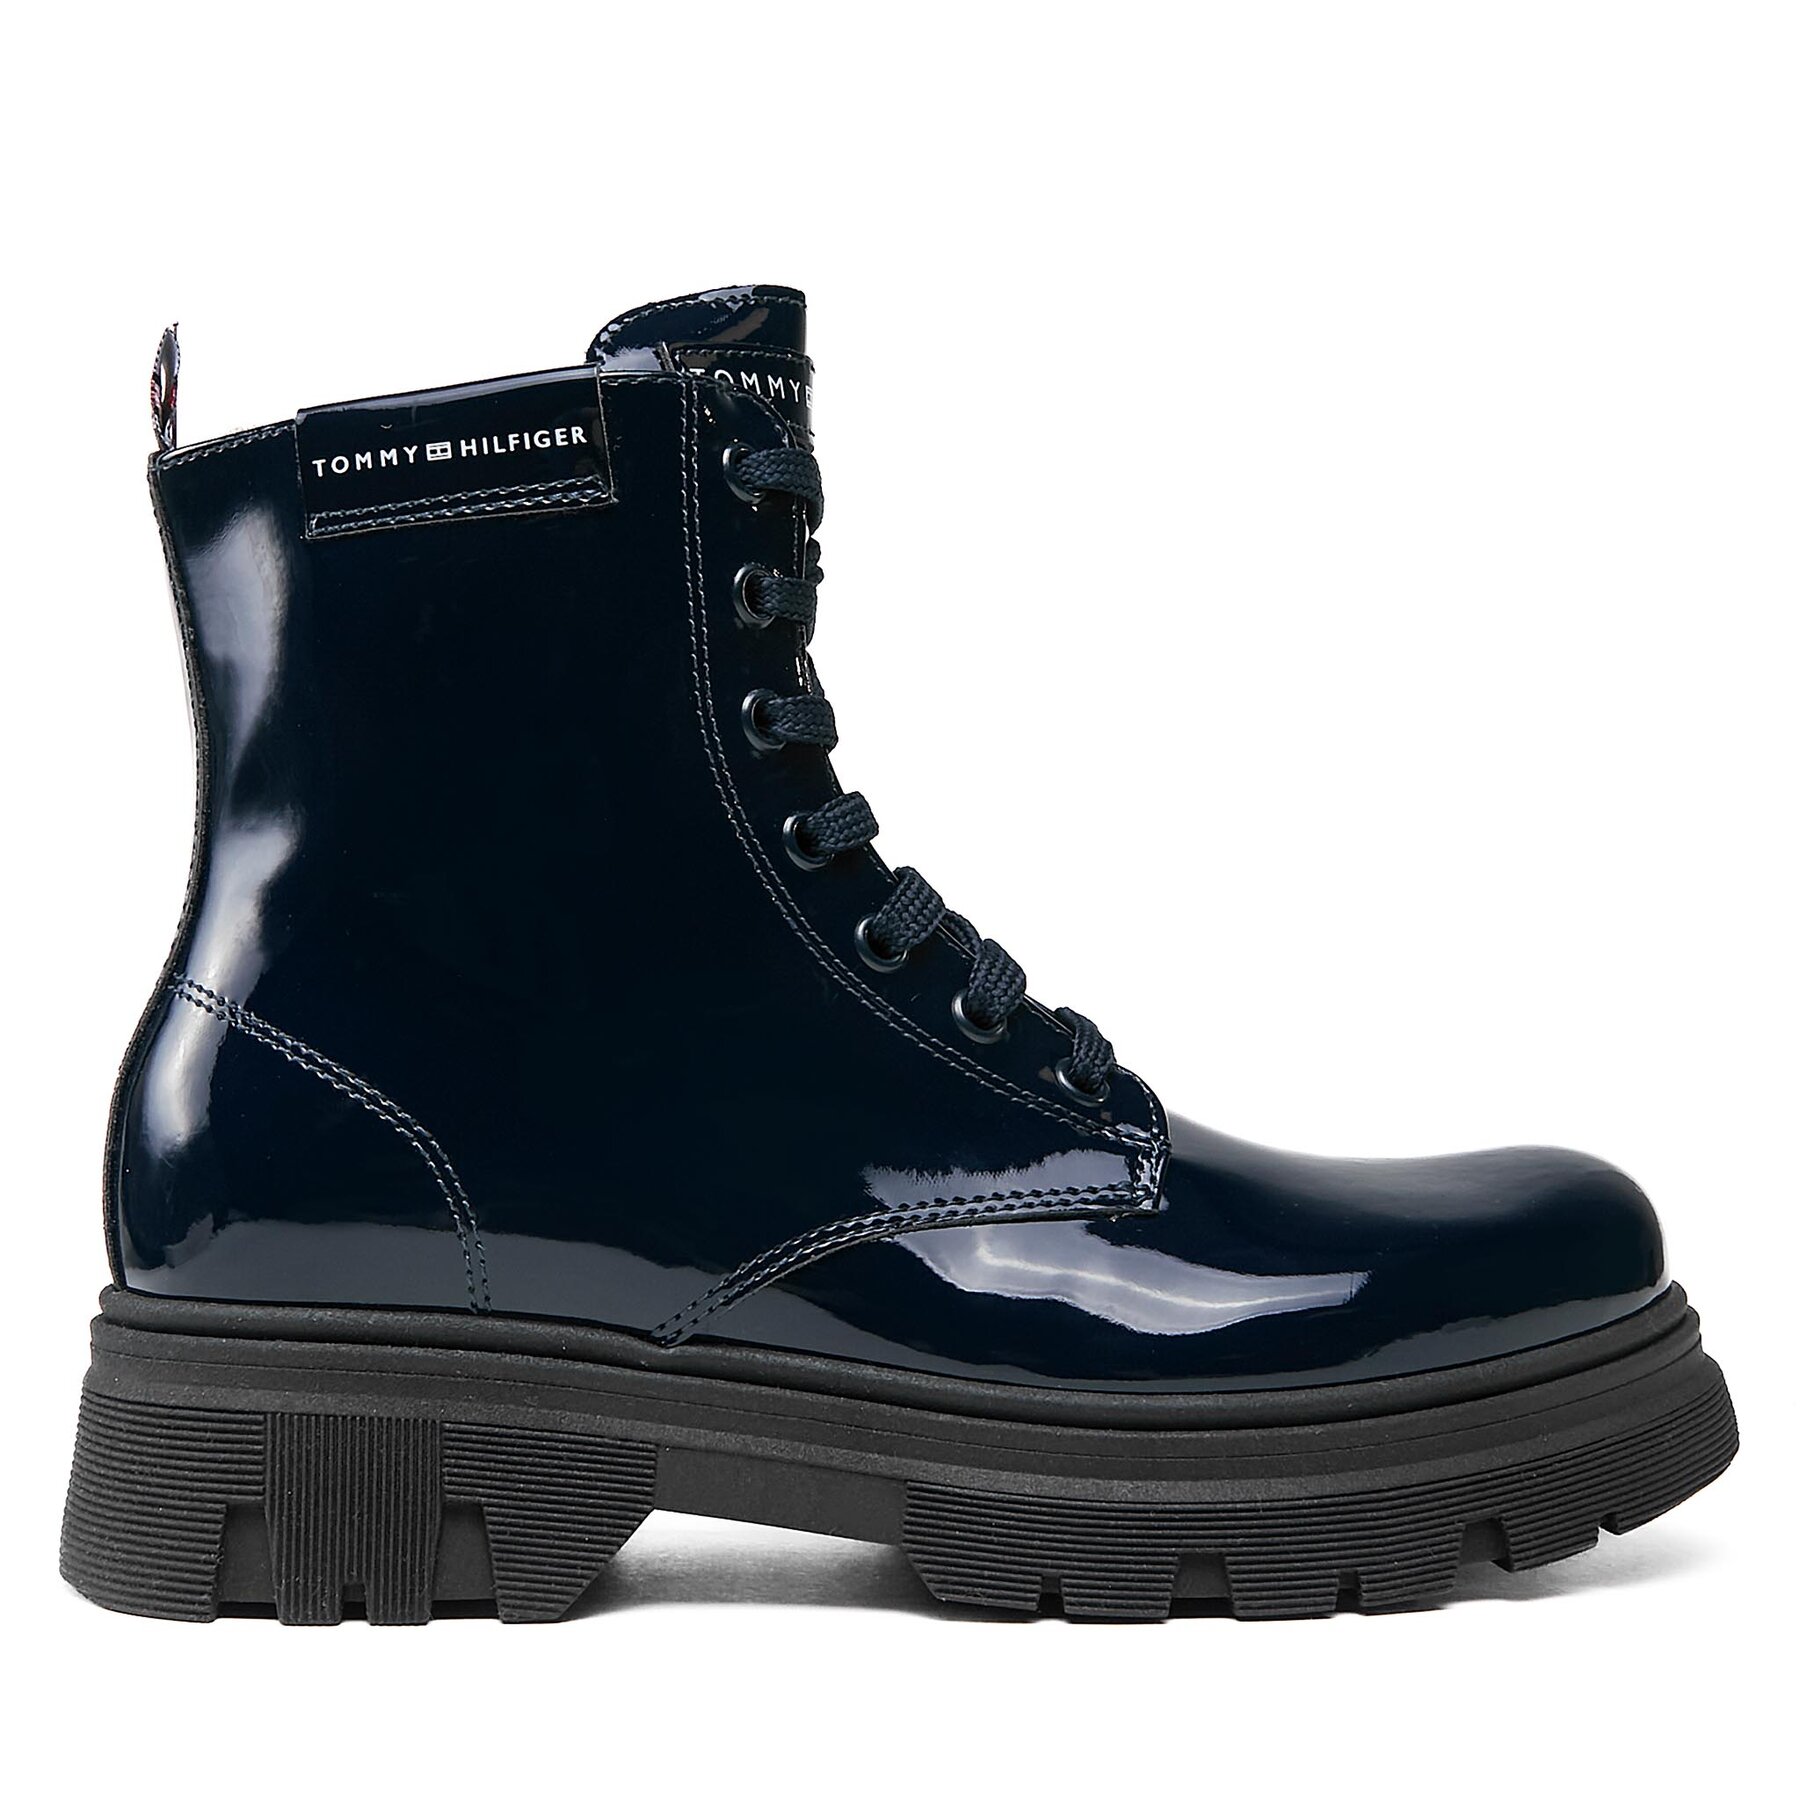 Tommy Hilfiger T4A5-33040-0775 S Blue 800 - Botas mujer